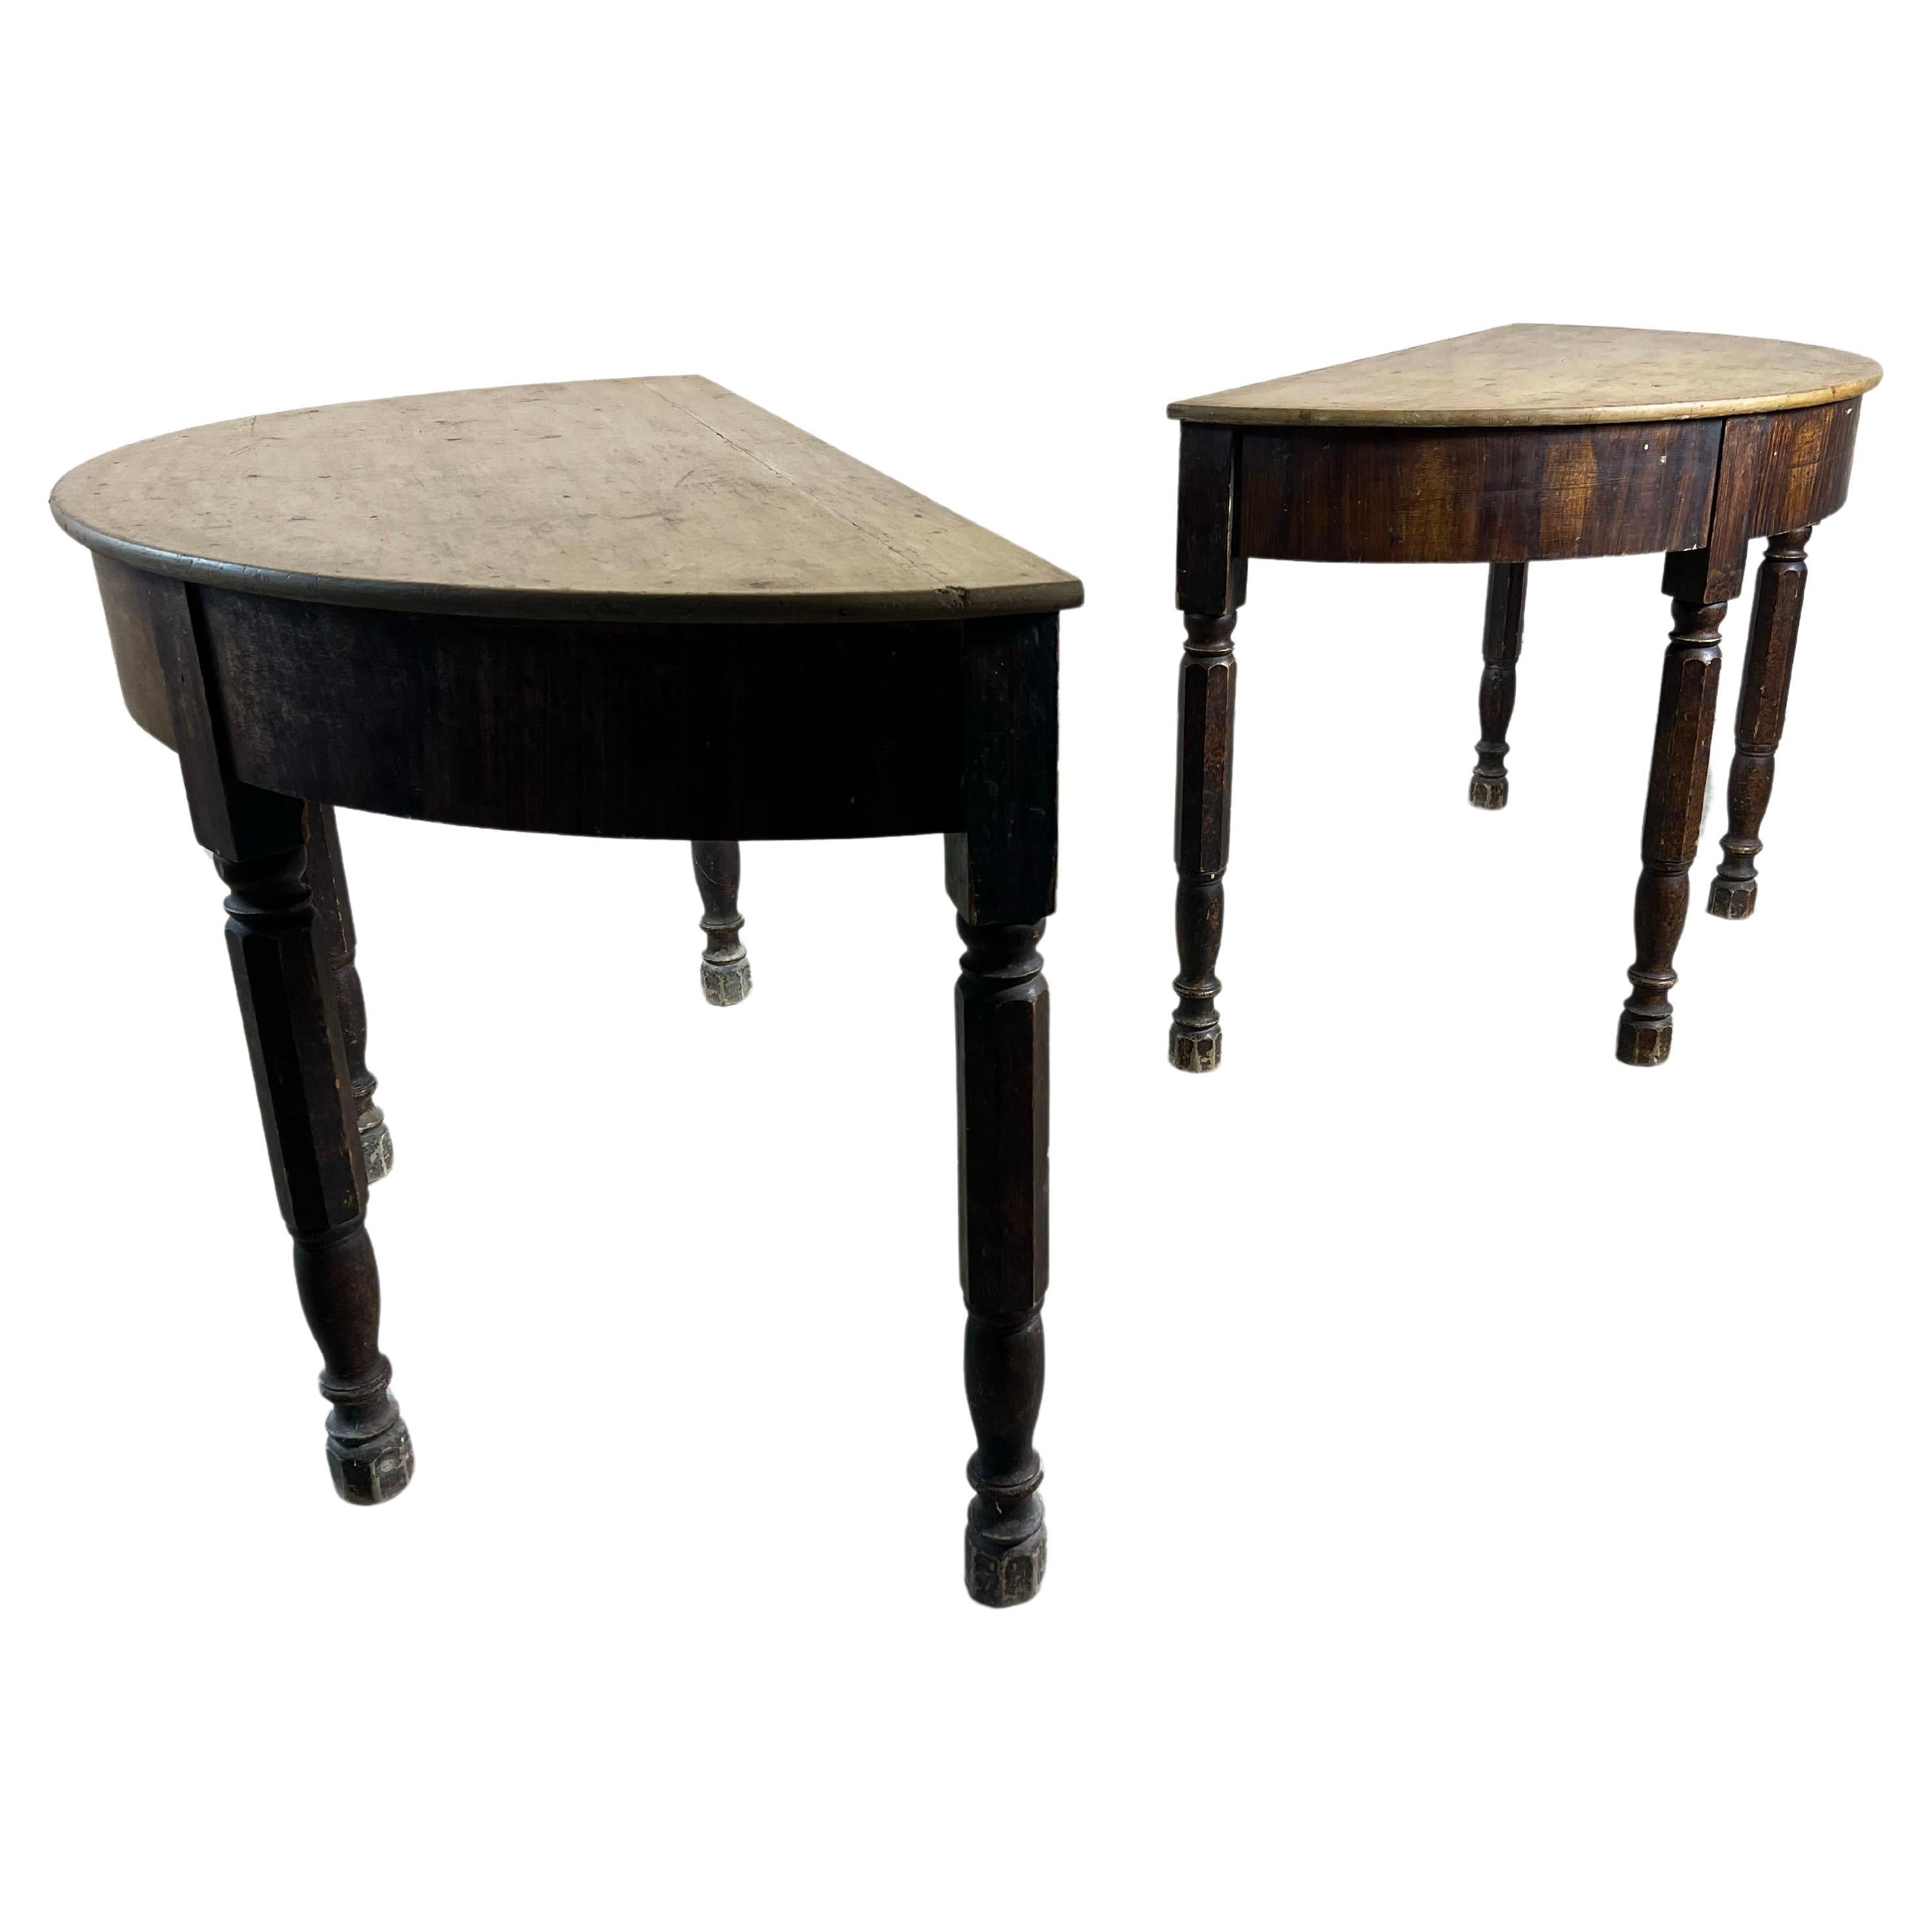 A pair of 19th Century Demi-Lune Tables